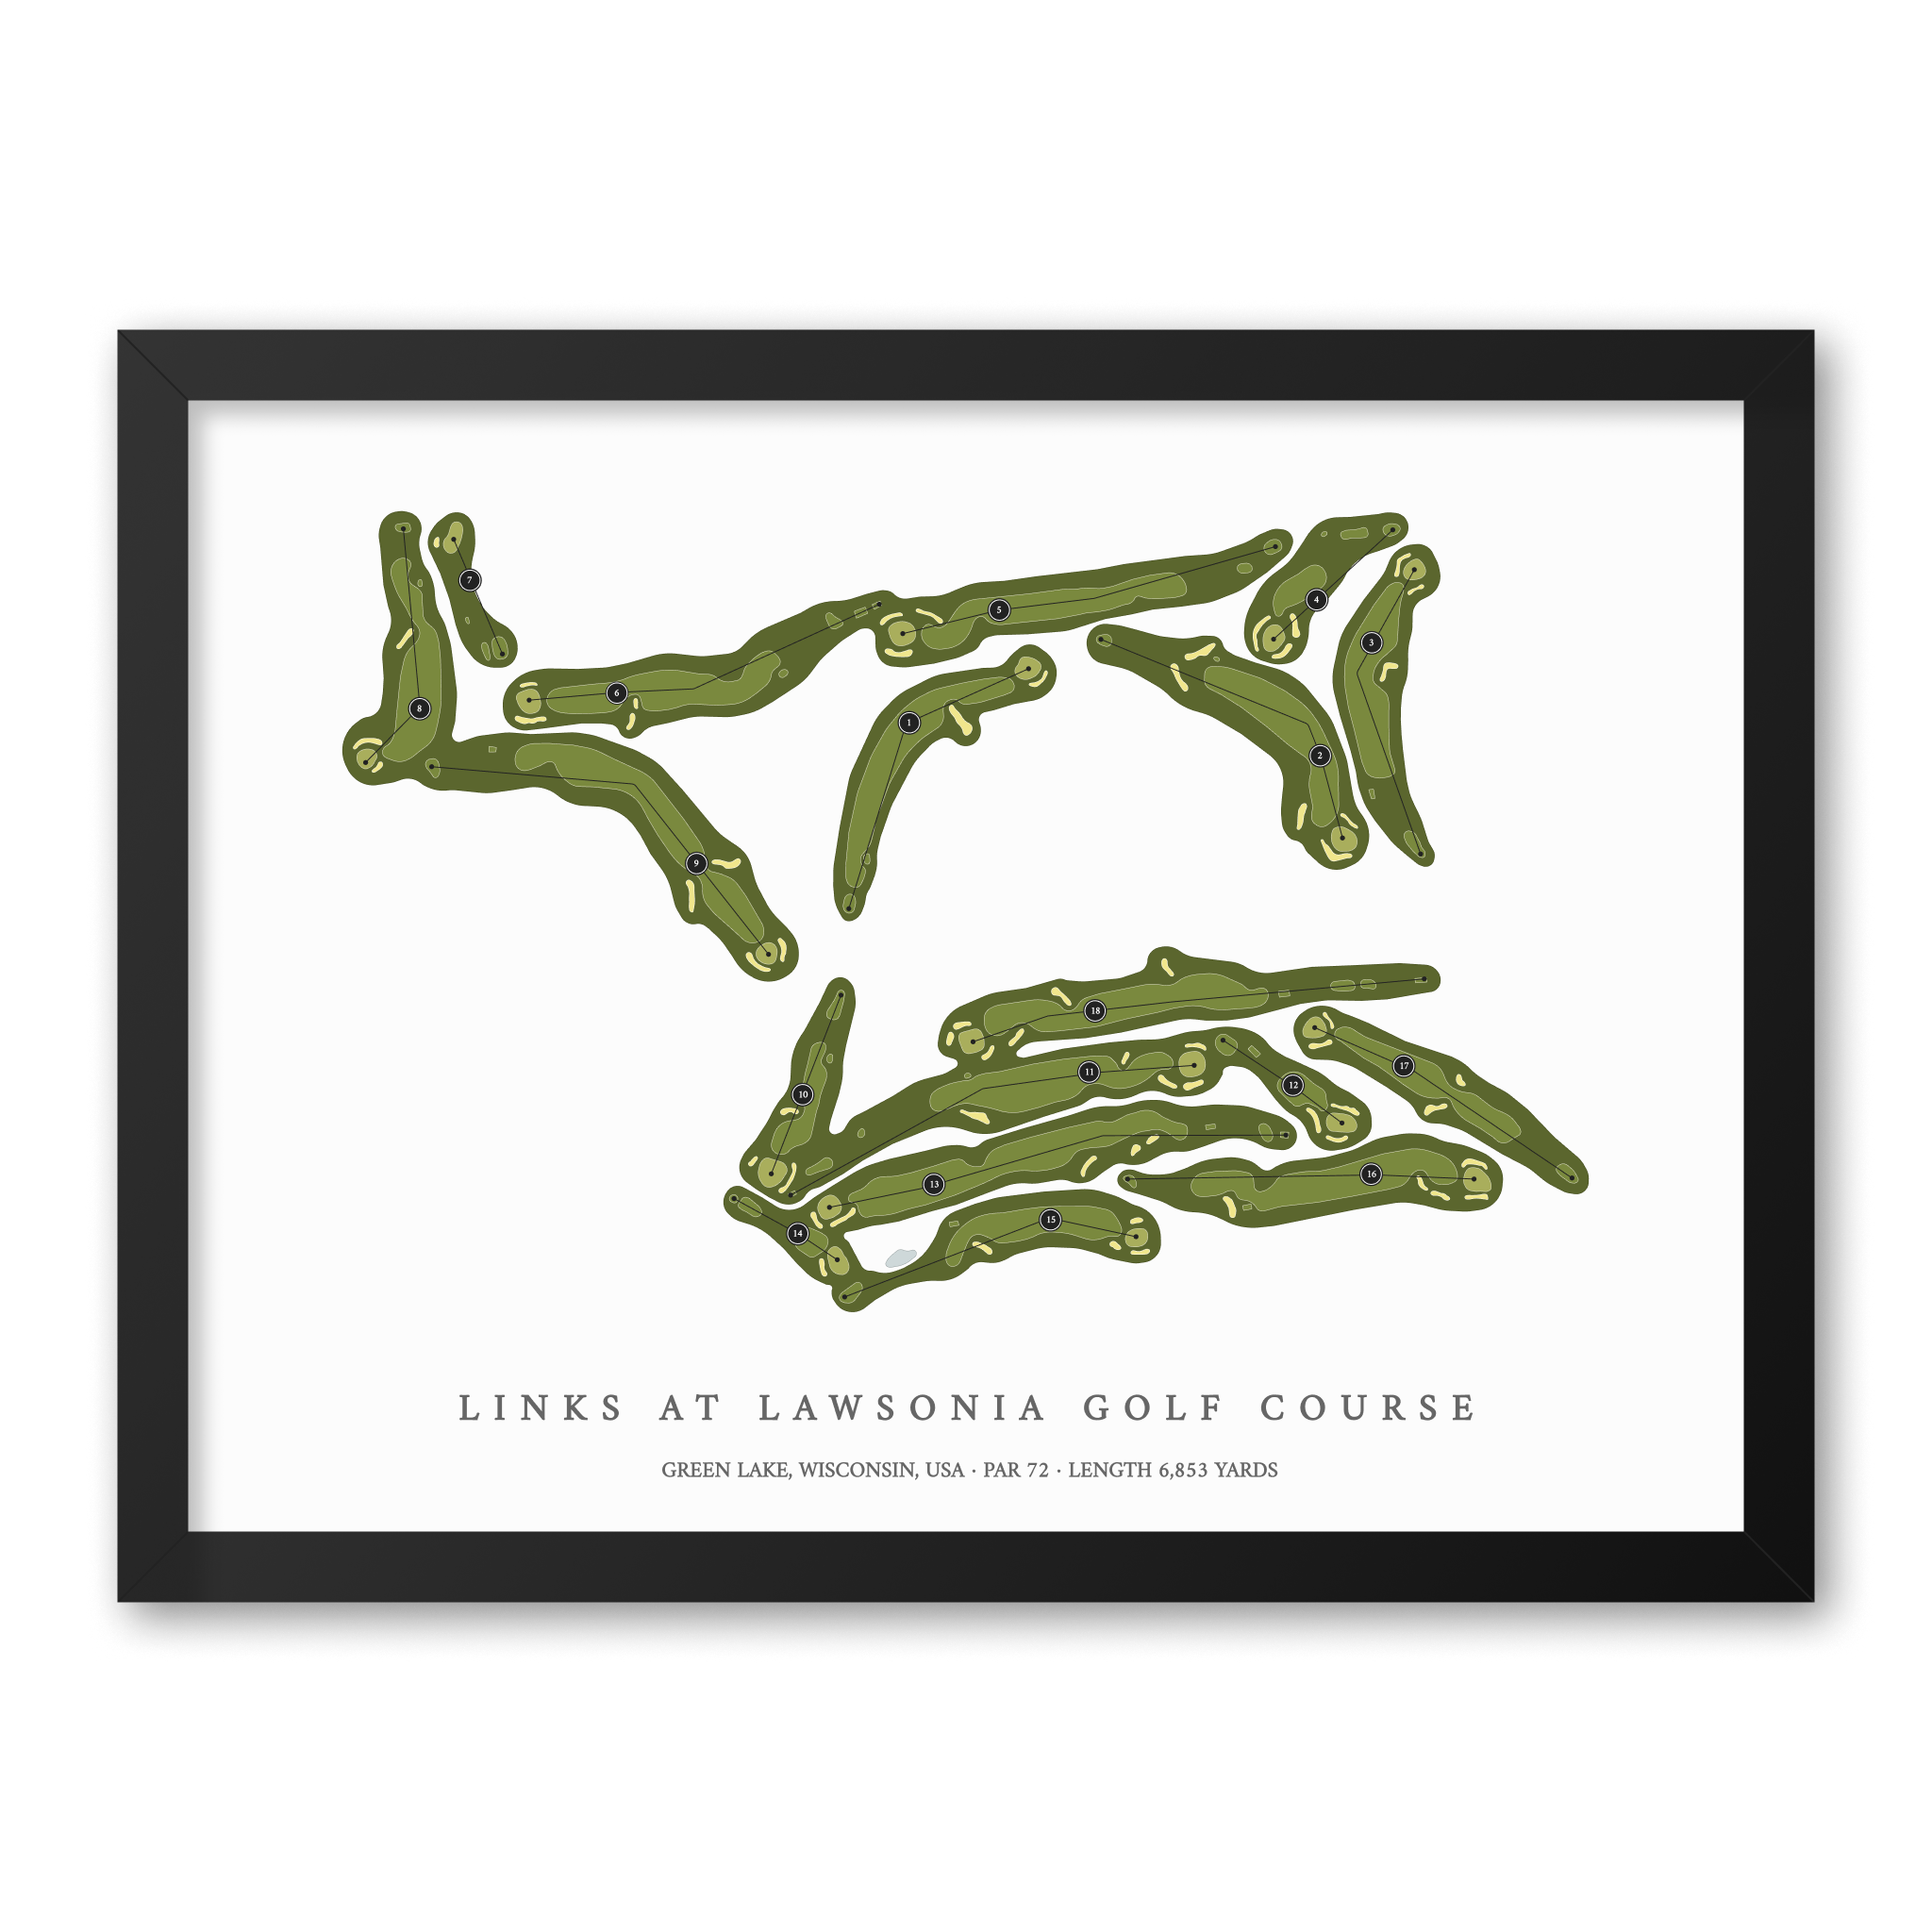 Links at Lawsonia Golf Course | Golf Course Map | Black Frame